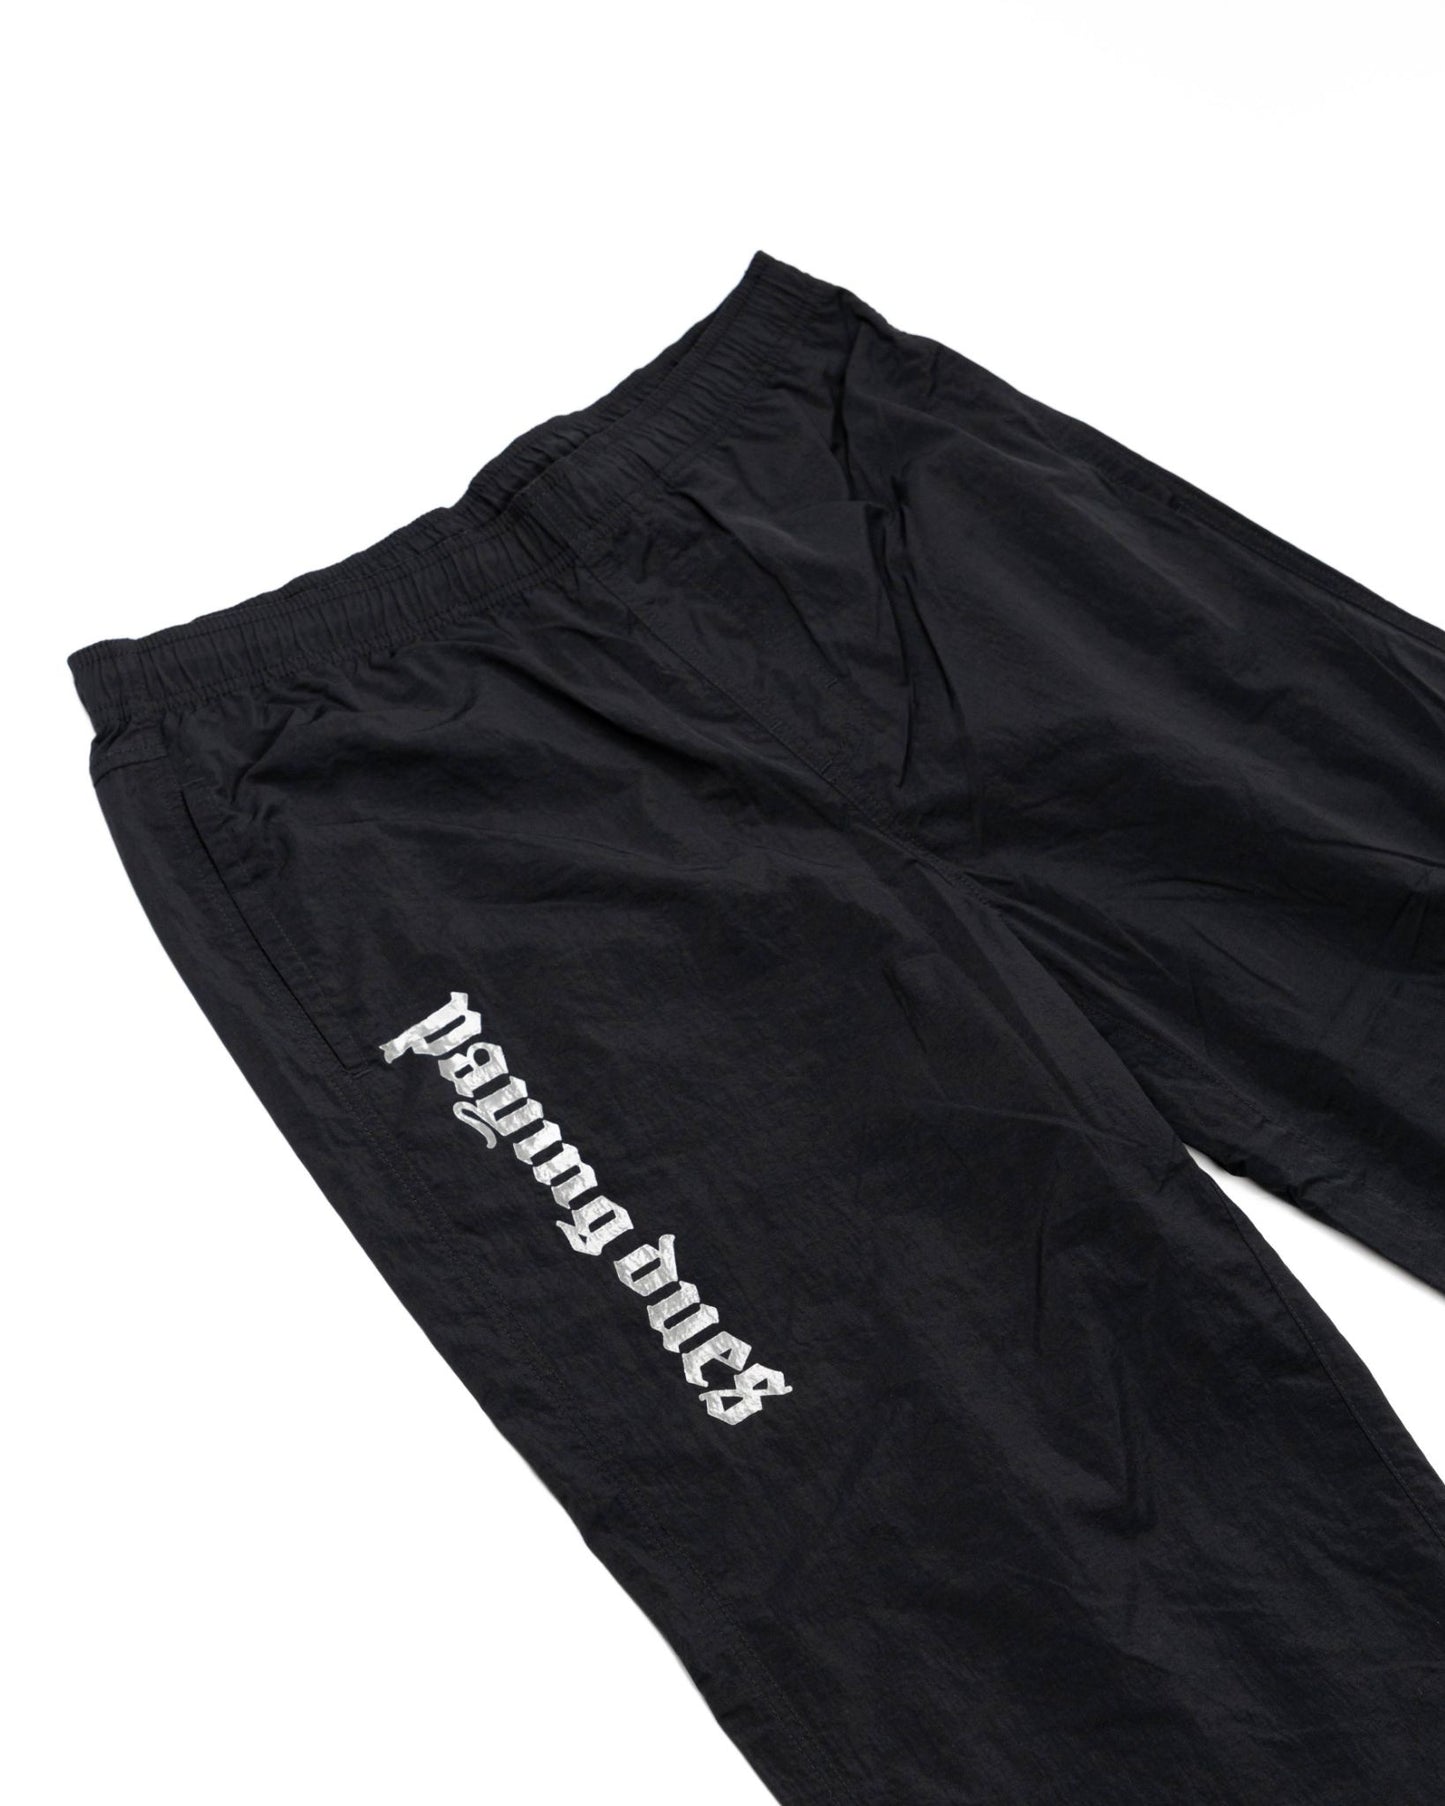 Bulged Founder Warm Up Pants